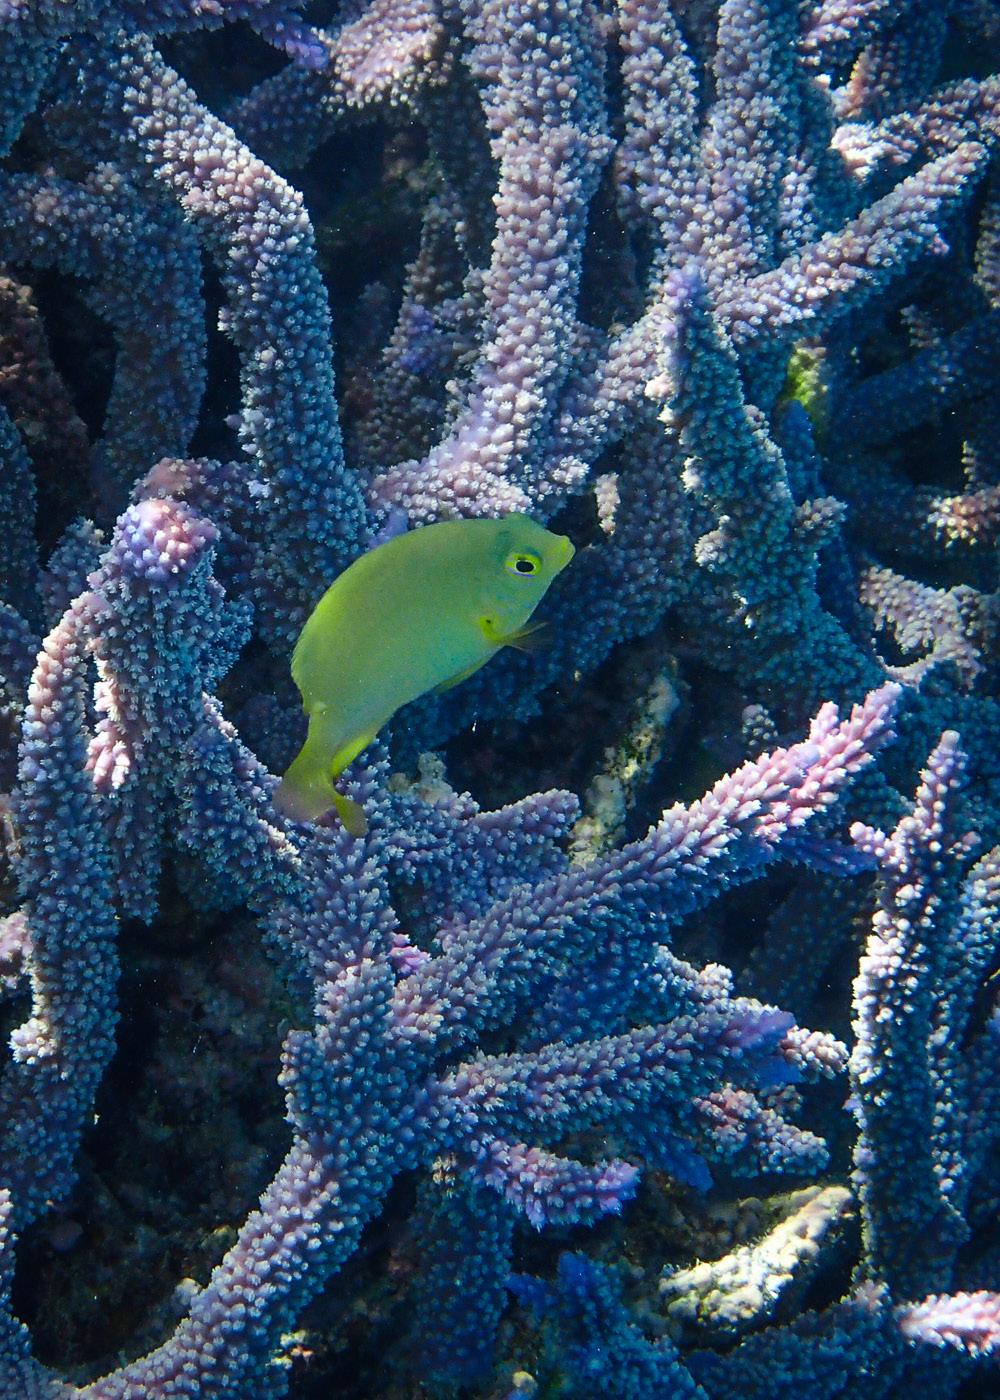 Use complementary colours: Yellow Damsel Fish against purple